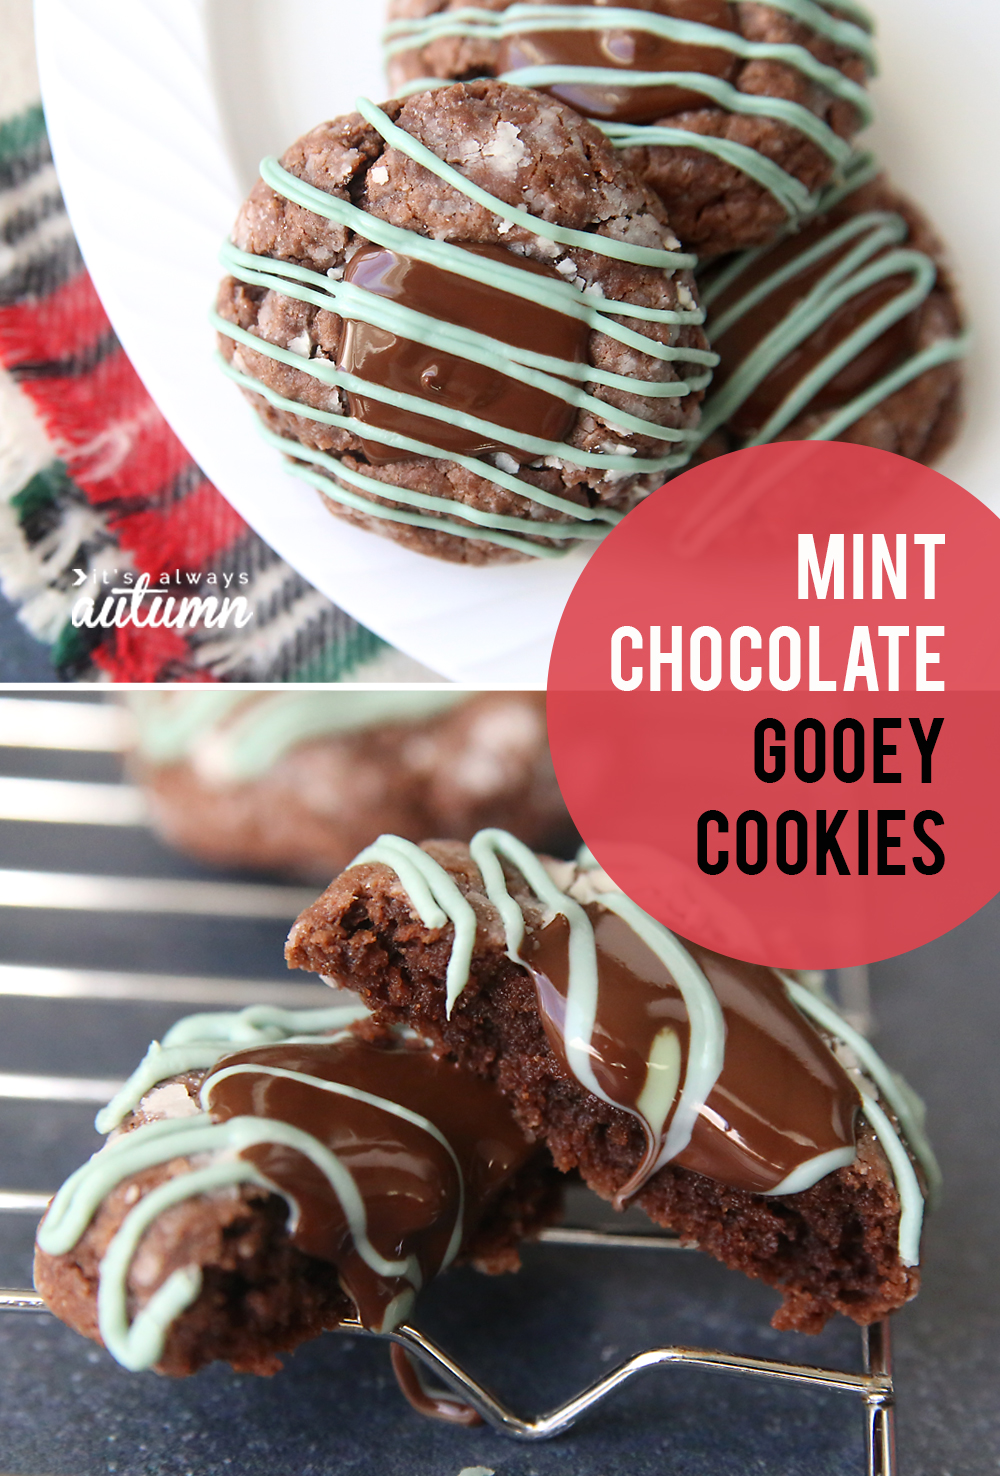 Mint chocolate gooey cookies are the best cookies you've ever tasted! Super easy Christmas cookie recipe.